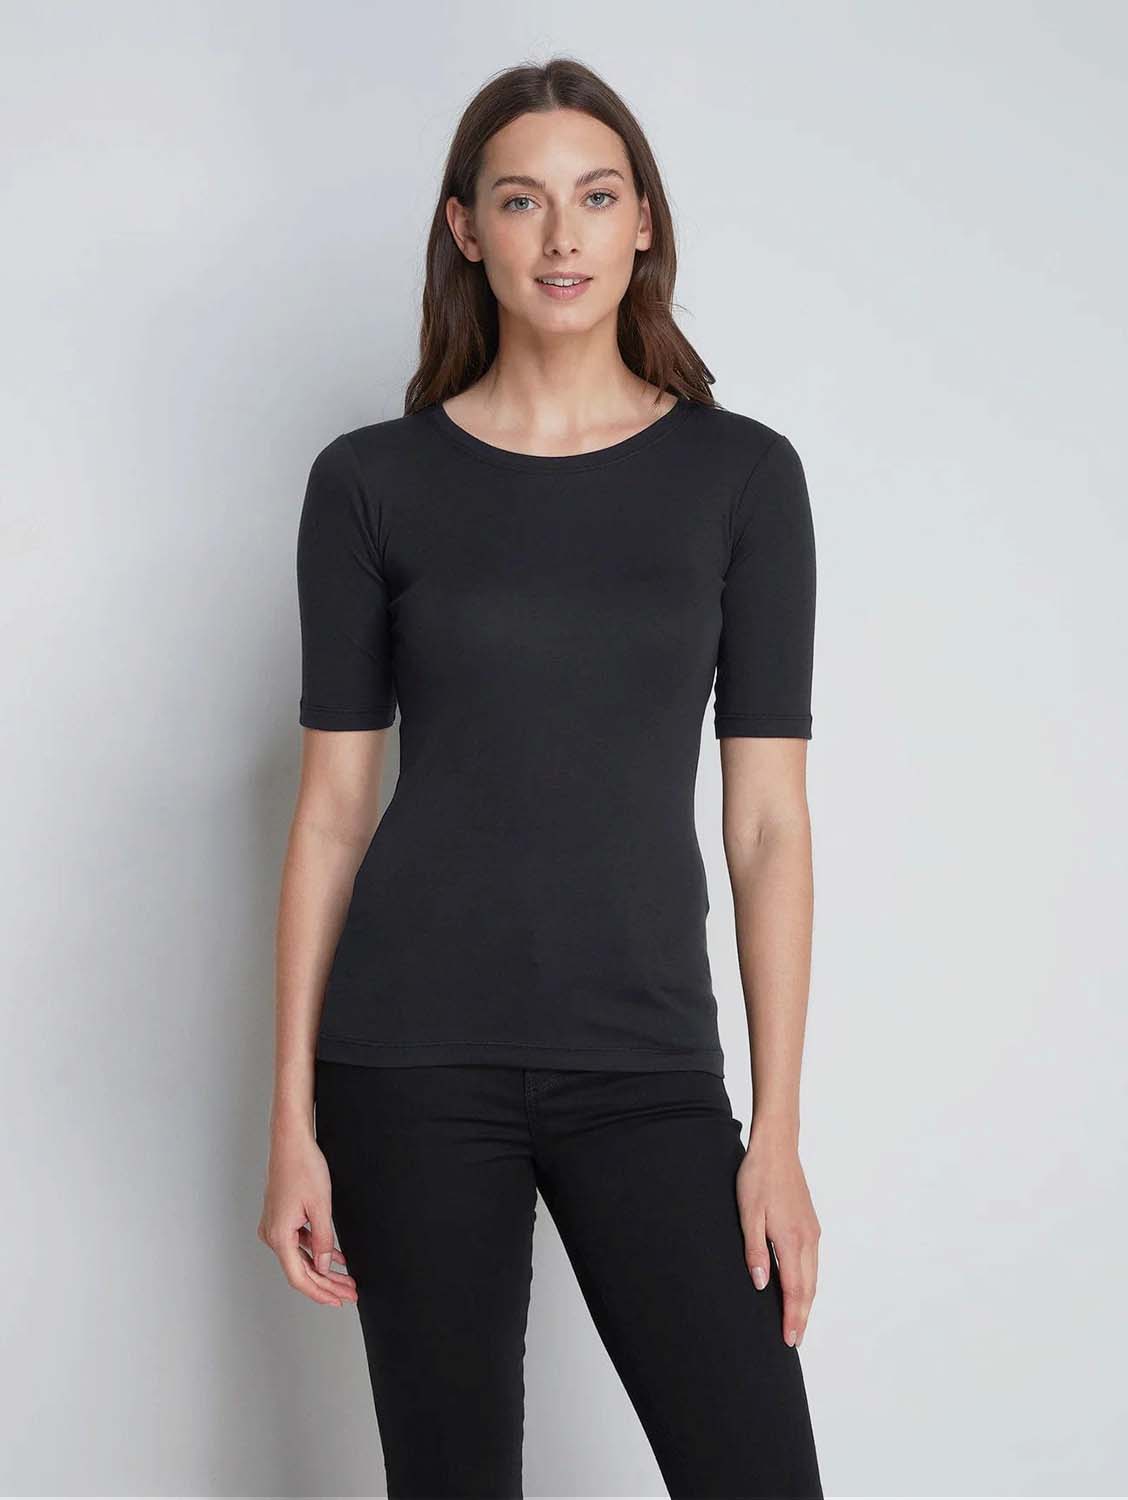 Women's Sustainable Tops & T-Shirts - Immaculate Vegan